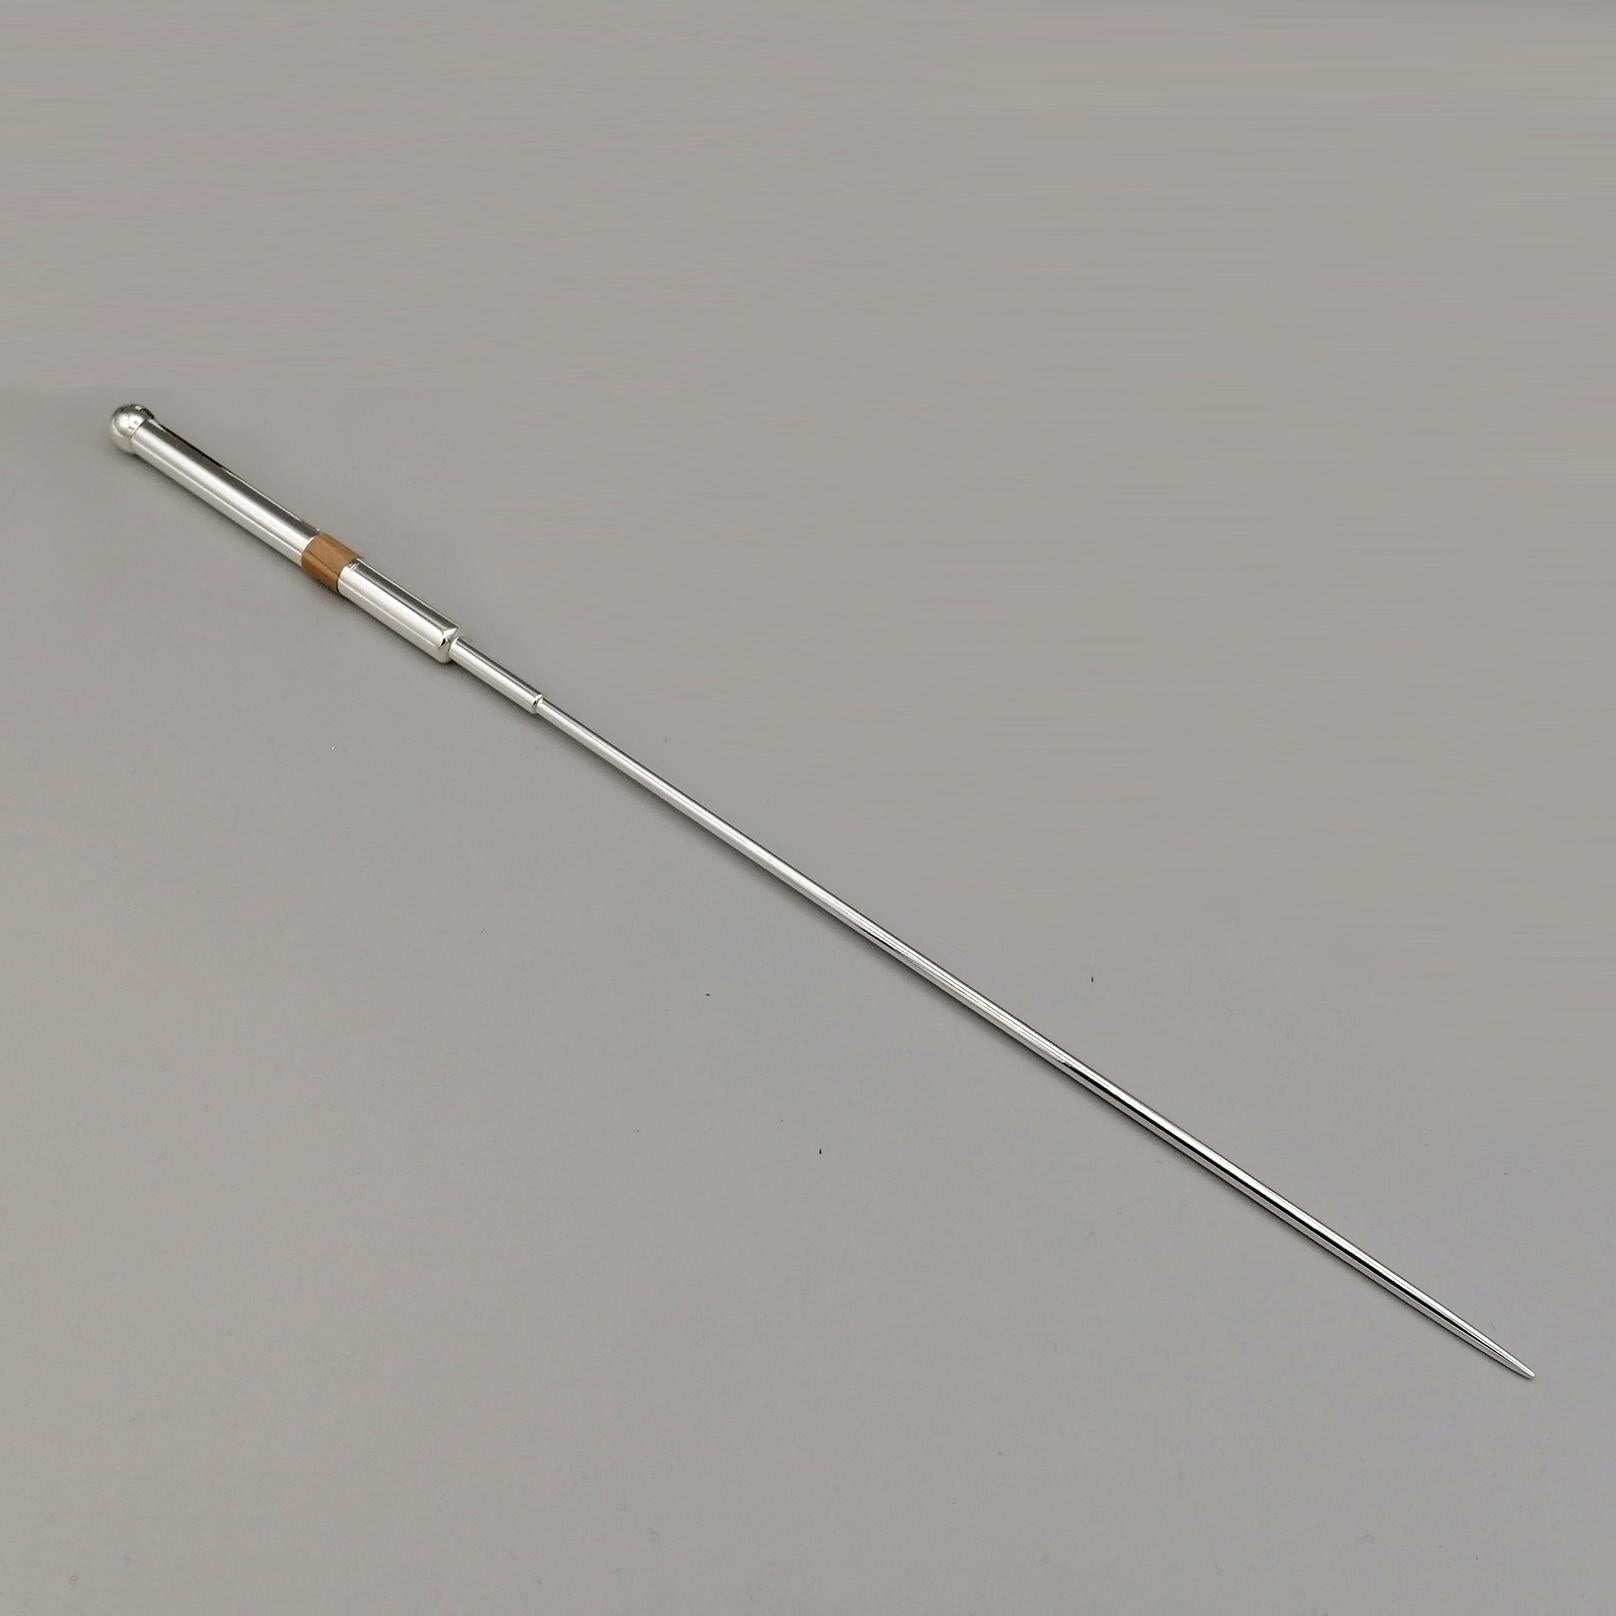 Contemporary 21th Century Italian Sterling Silver and Wood Conductor' Baton For Sale